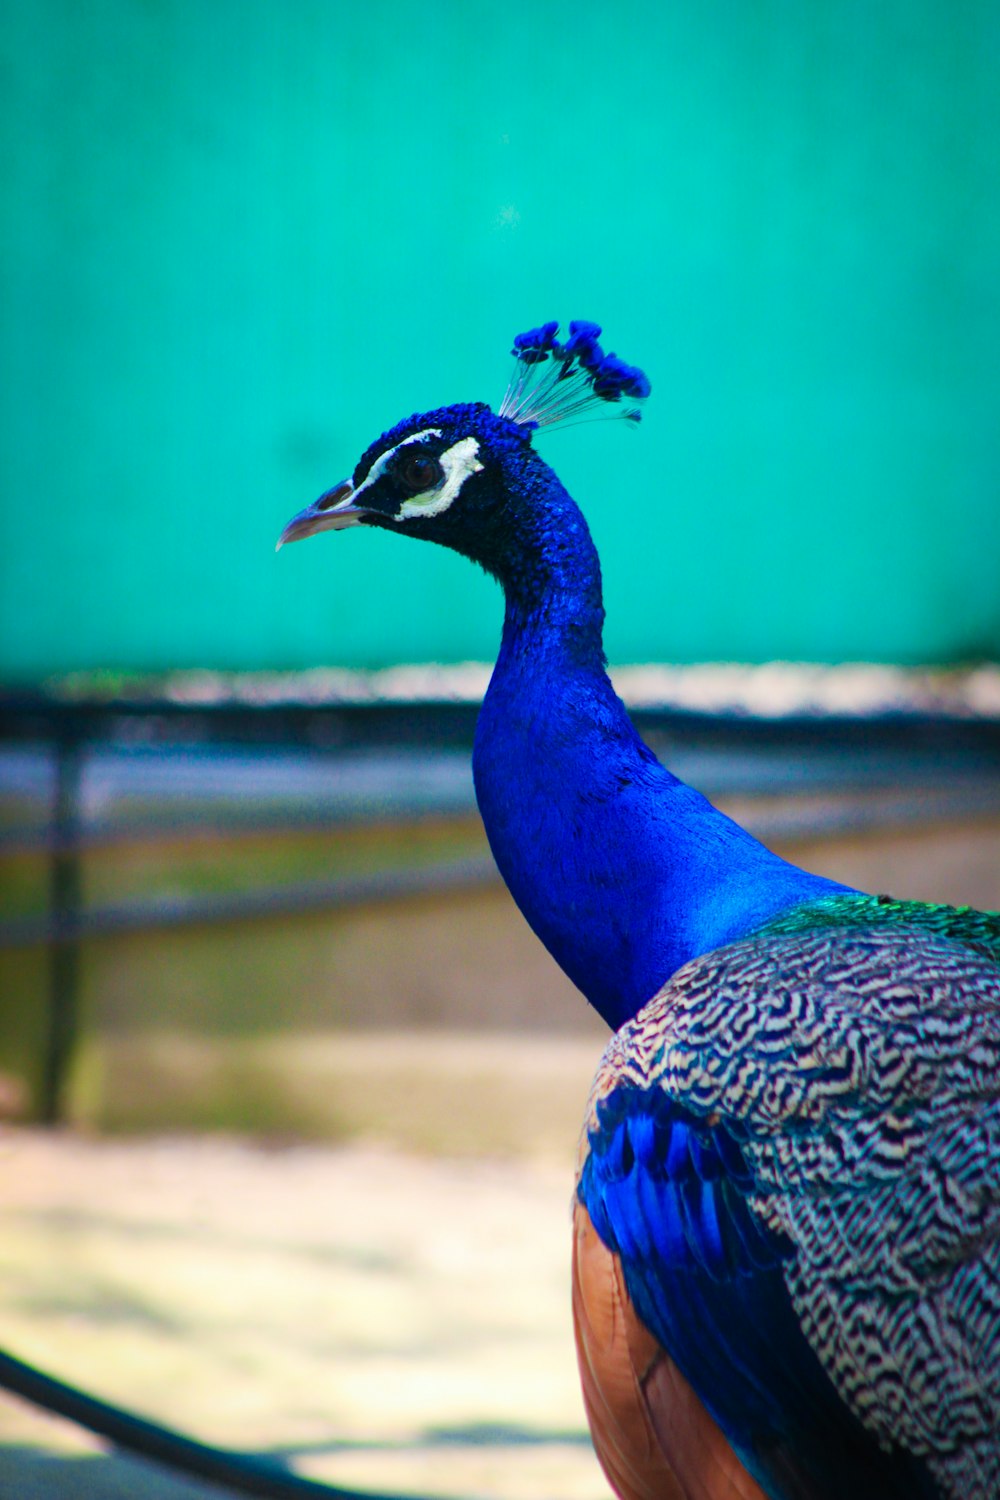 a peacock standing in front of a green wall